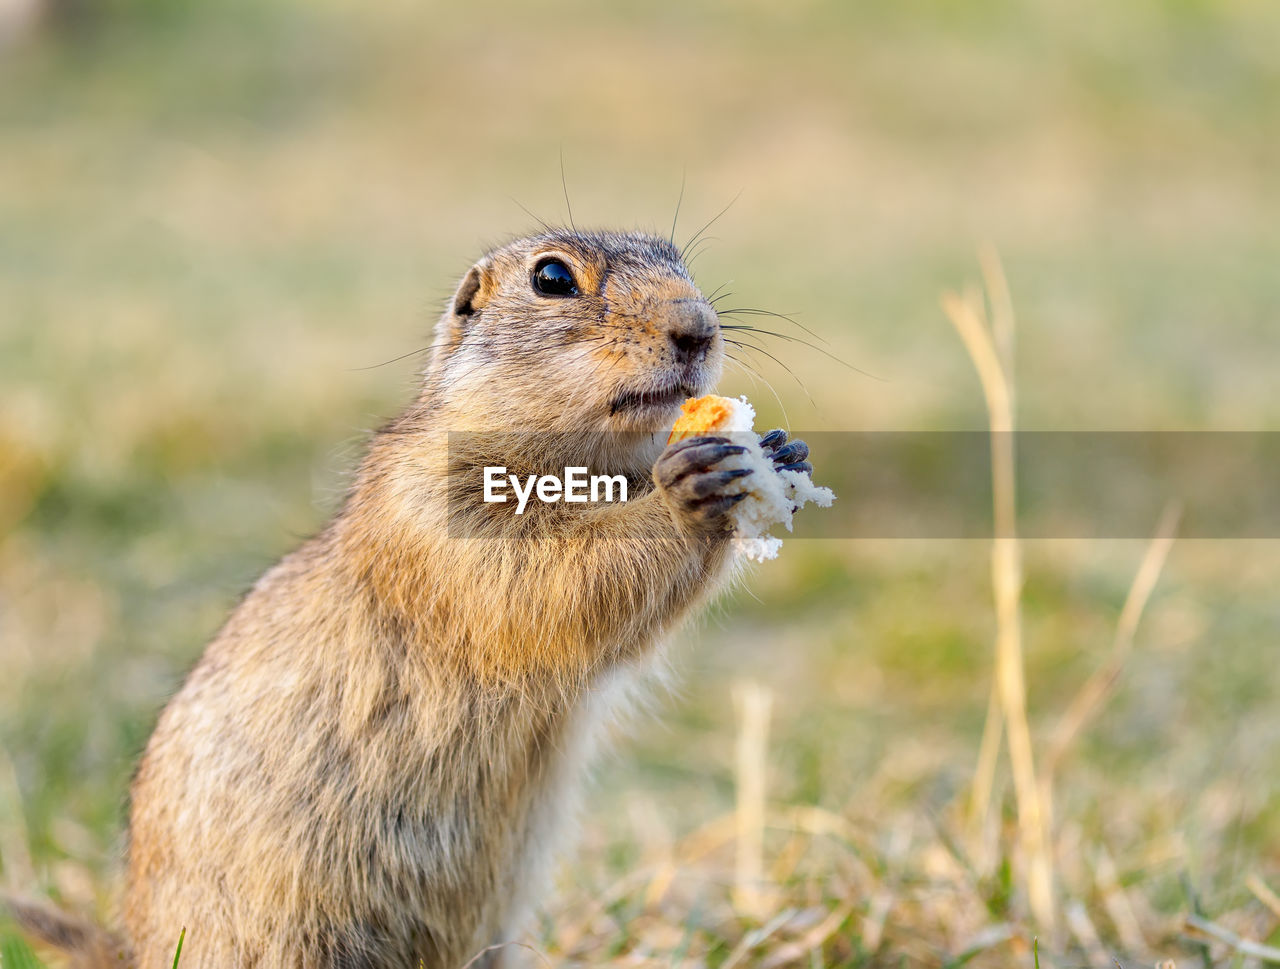 animal, animal themes, animal wildlife, one animal, squirrel, mammal, wildlife, eating, whiskers, rodent, prairie dog, prairie, no people, nature, food, grass, food and drink, outdoors, chipmunk, portrait, plant, day, side view, close-up, focus on foreground, cute, feeding, animal body part